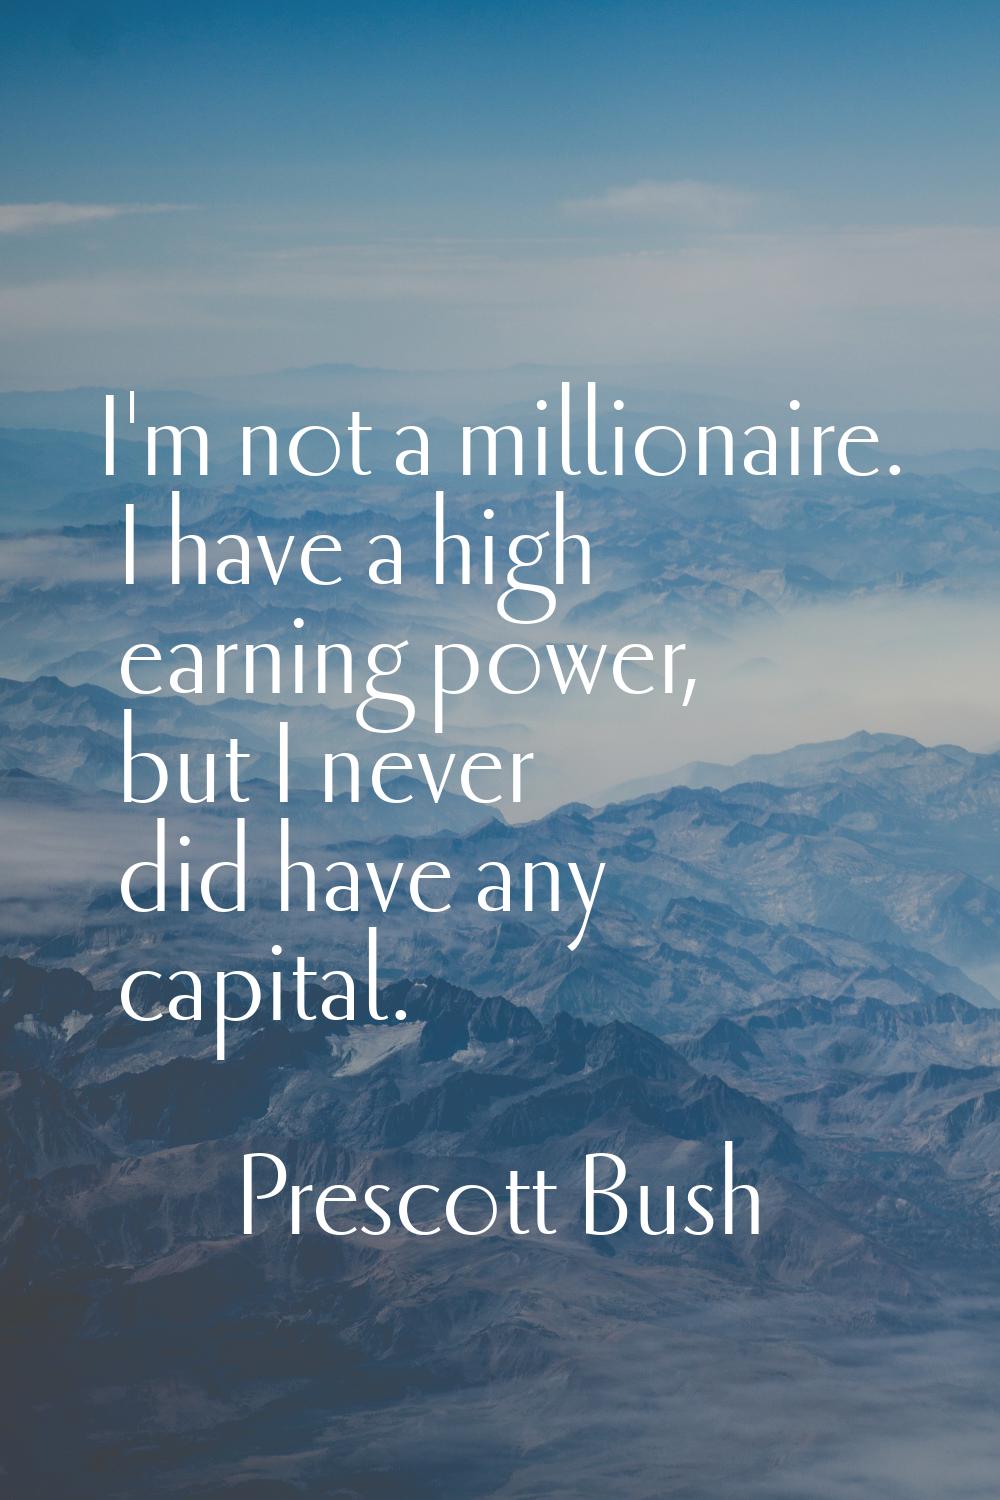 I'm not a millionaire. I have a high earning power, but I never did have any capital.